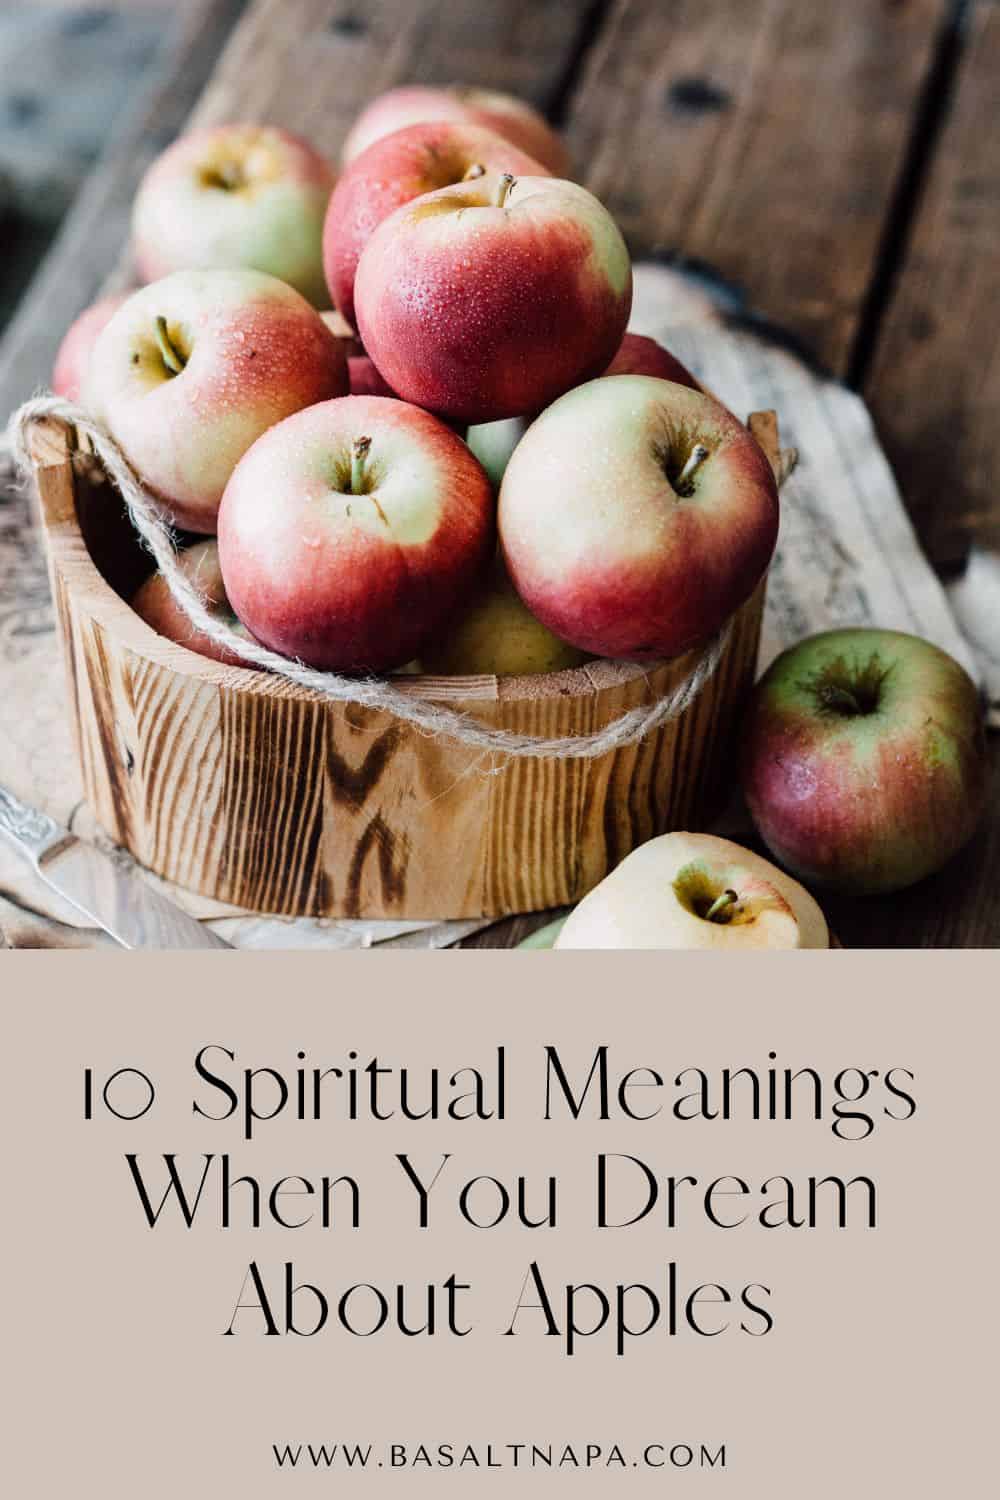 10 Spiritual Meanings When You Dream About Apples